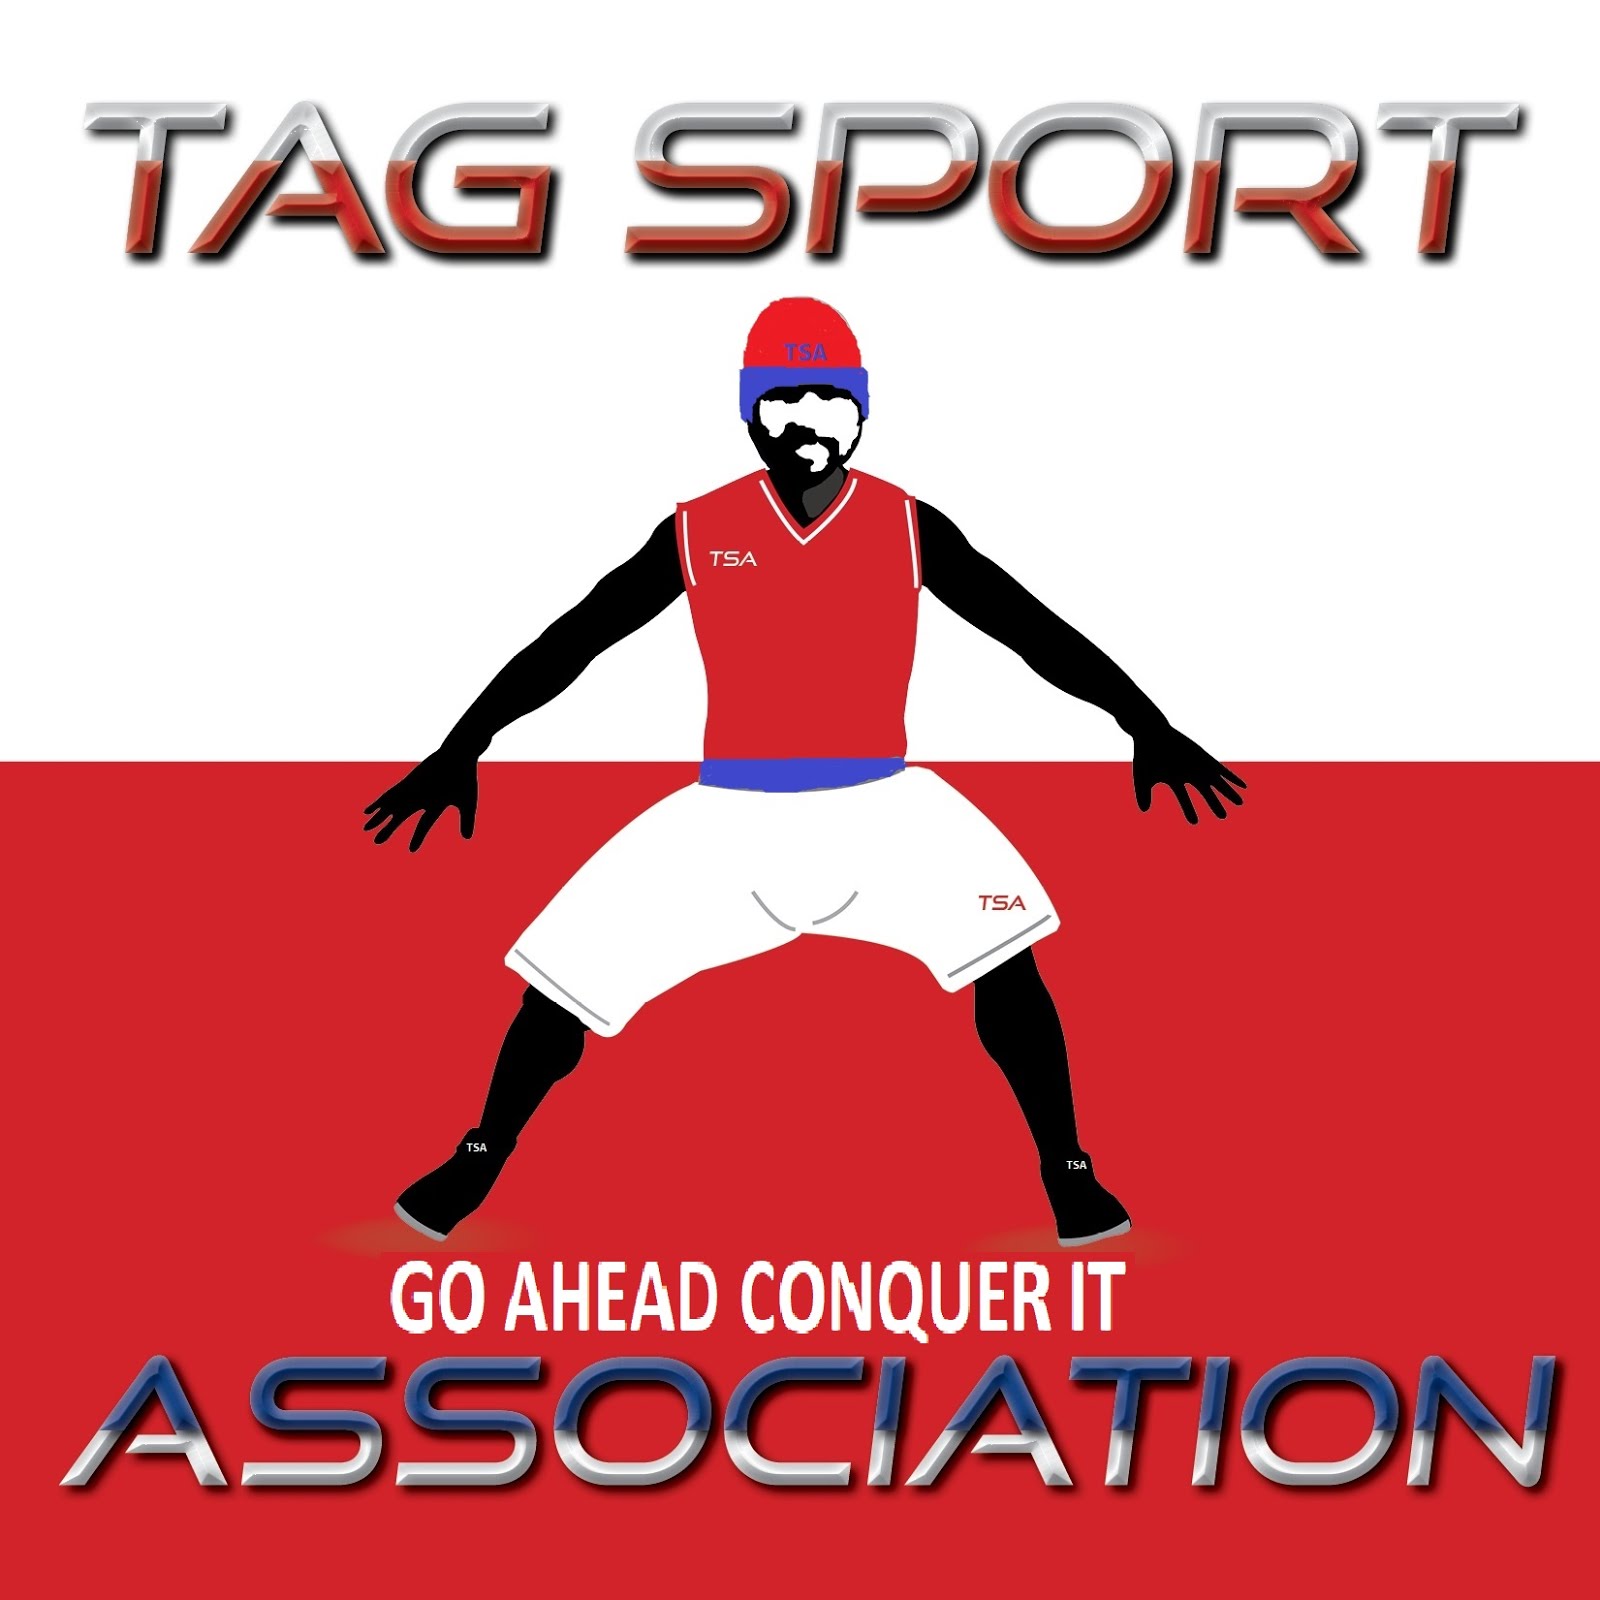 TAG SPORT ASSOCIATION   NO JUST ONLY TRY GO AHEAD AND CONQUER IT